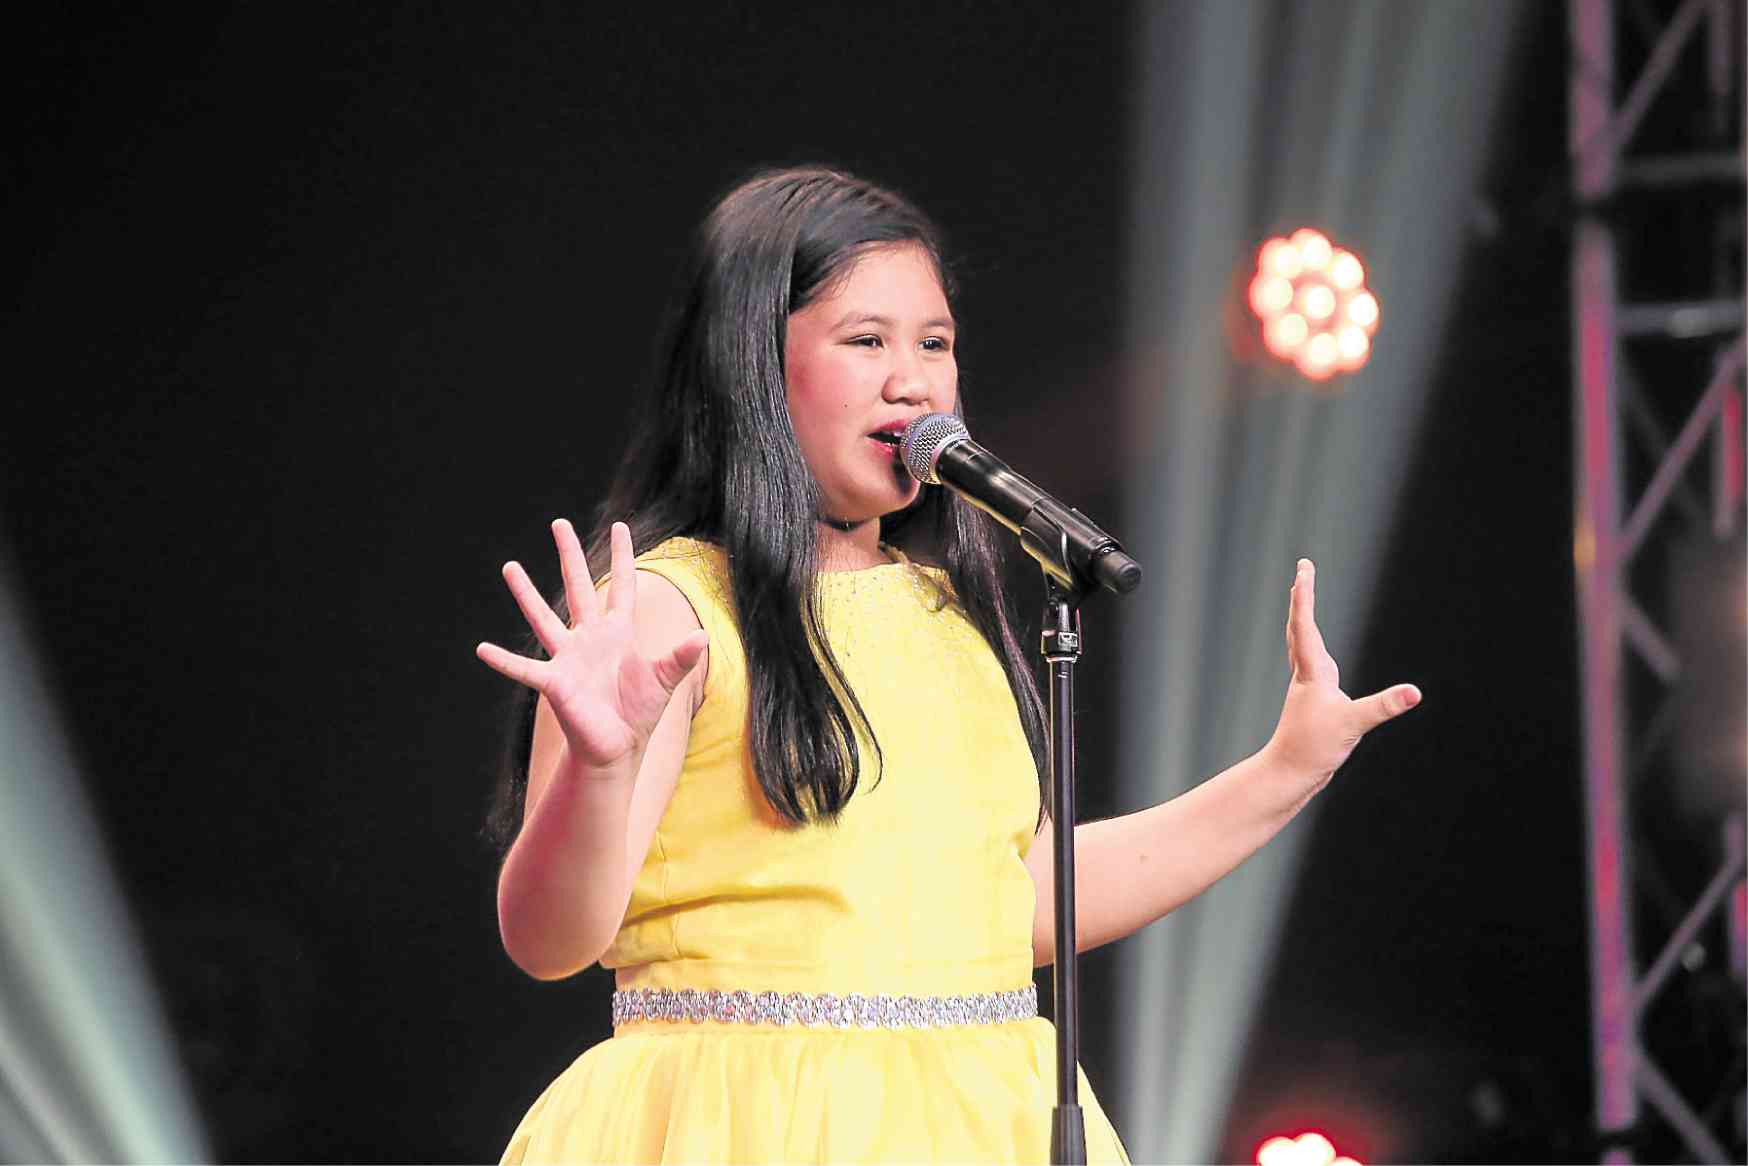 10-year-old singer clinches final Golden Buzzer for PH